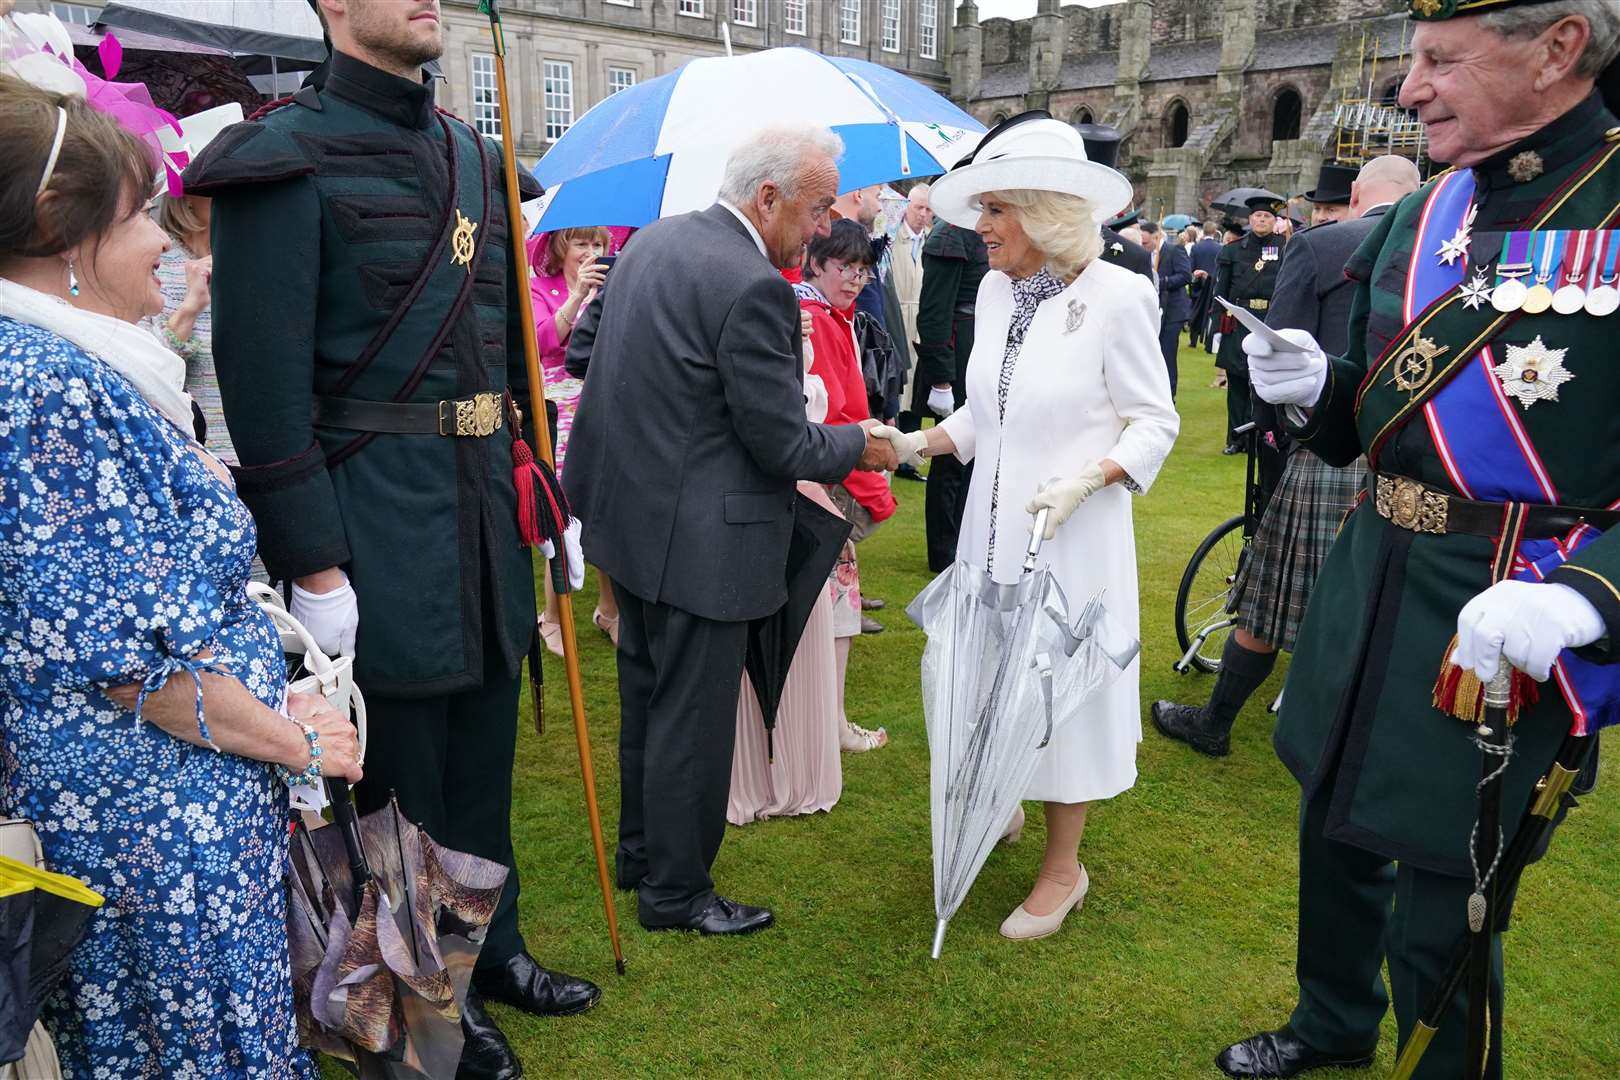 Queen Camilla greets guests during a garden party at the Palace of Holyroodhouse in Edinburgh (Jonathan Brady/PA)